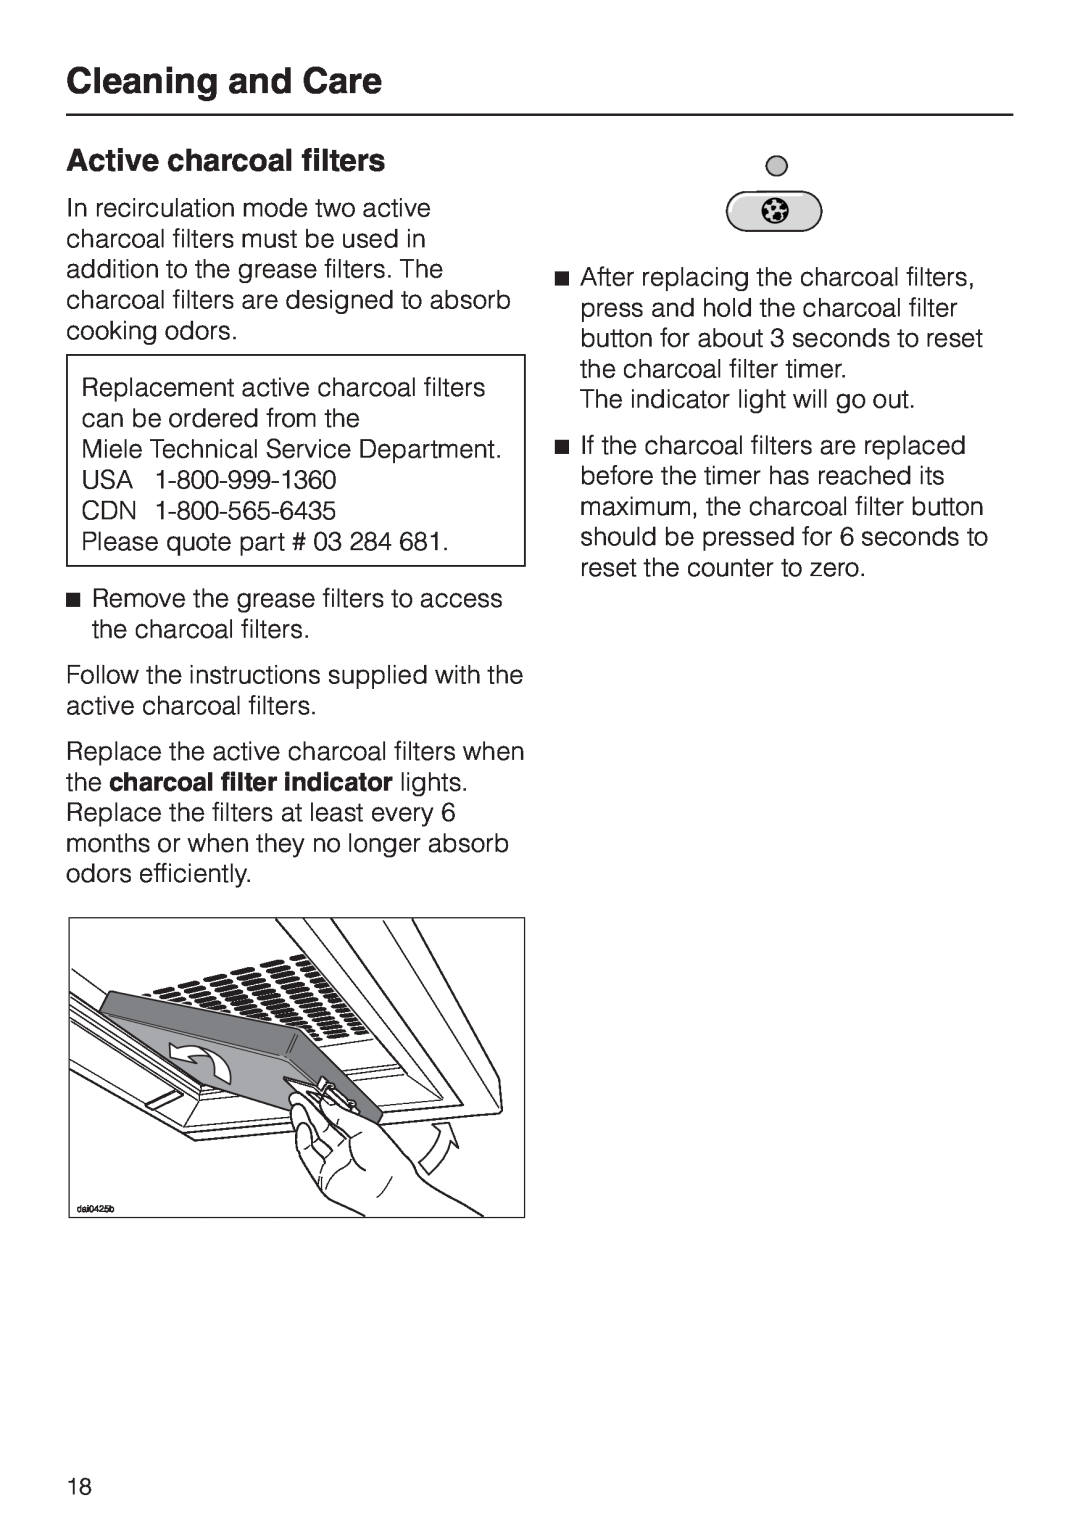 Miele DA218, DA211 installation instructions Active charcoal filters, Cleaning and Care 